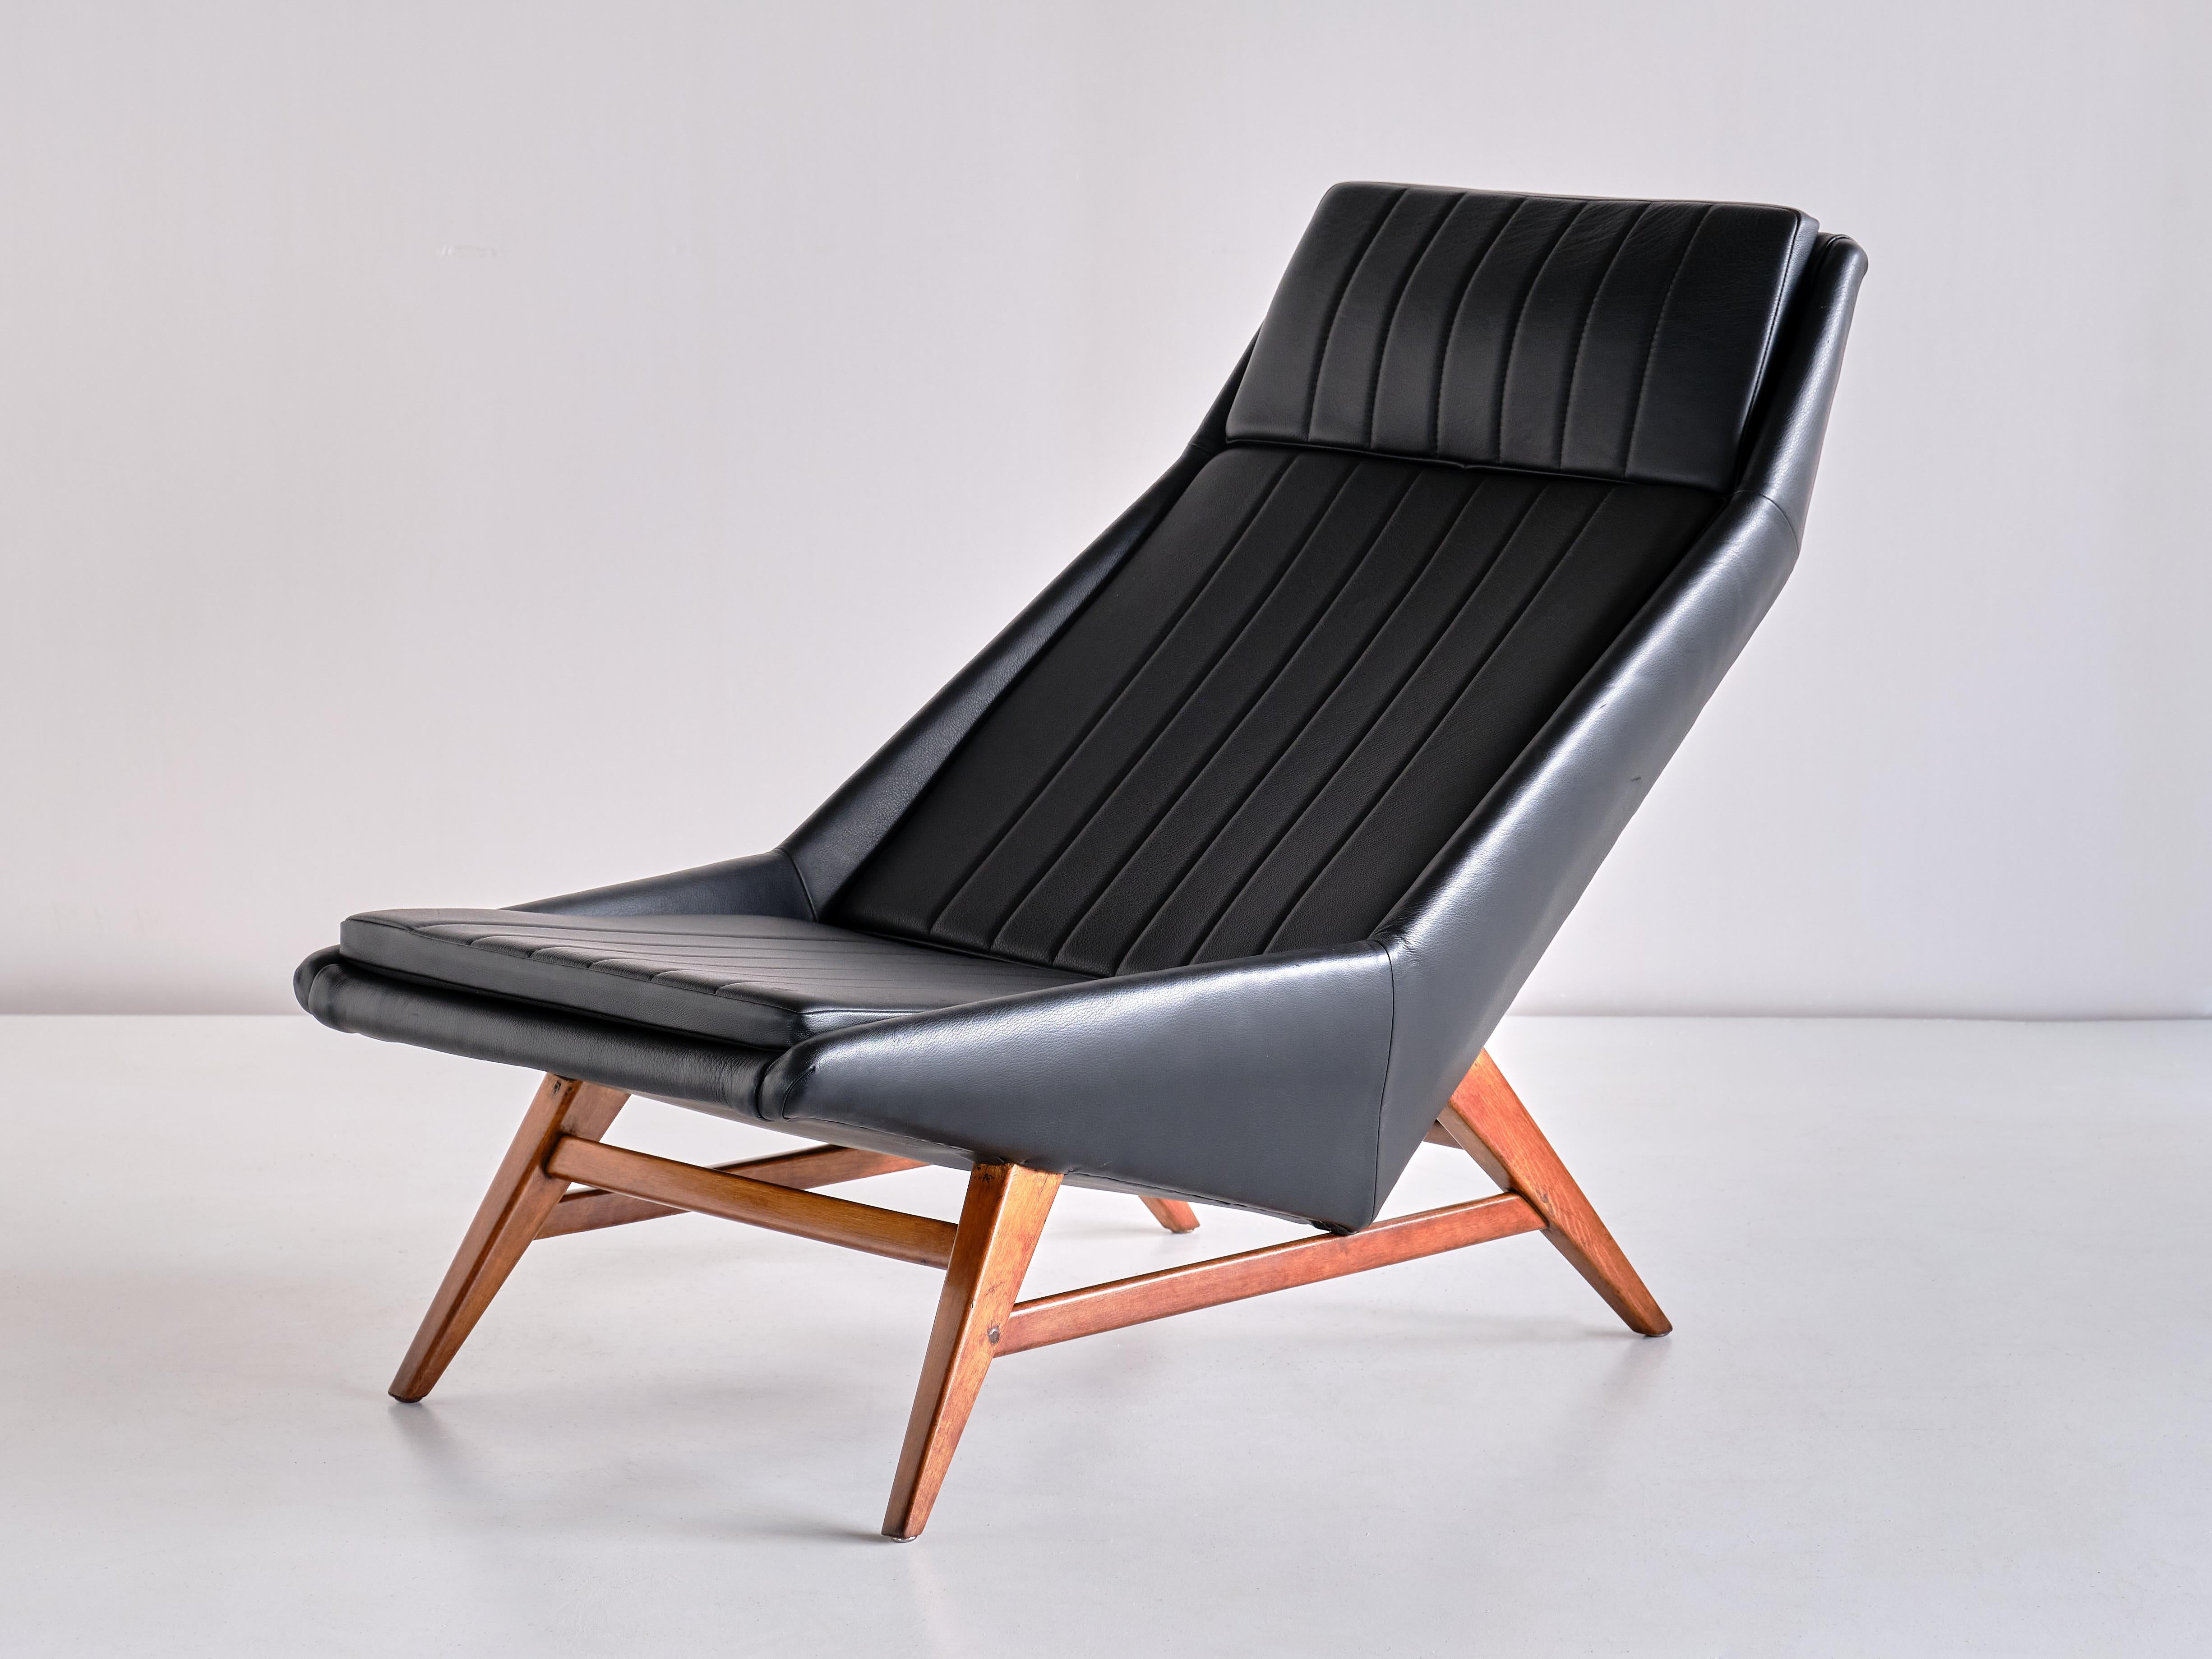 Svante Skogh Lounge Chair in Leather and Beech, AB Hjertquist & Co, Sweden, 1955 For Sale 1